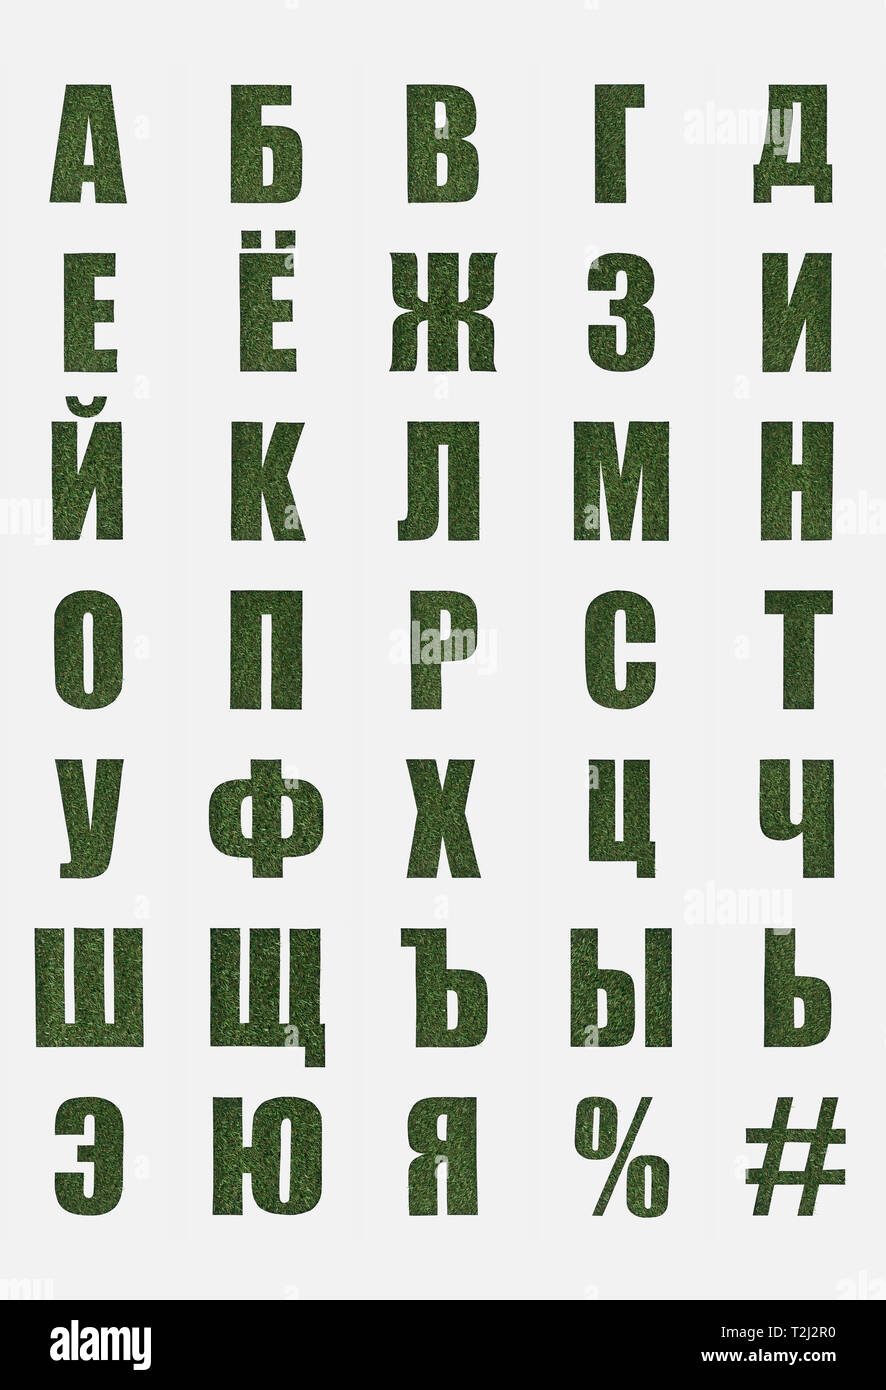 cyrillic letters from russian alphabet made of green grass isolated on white Stock Photo